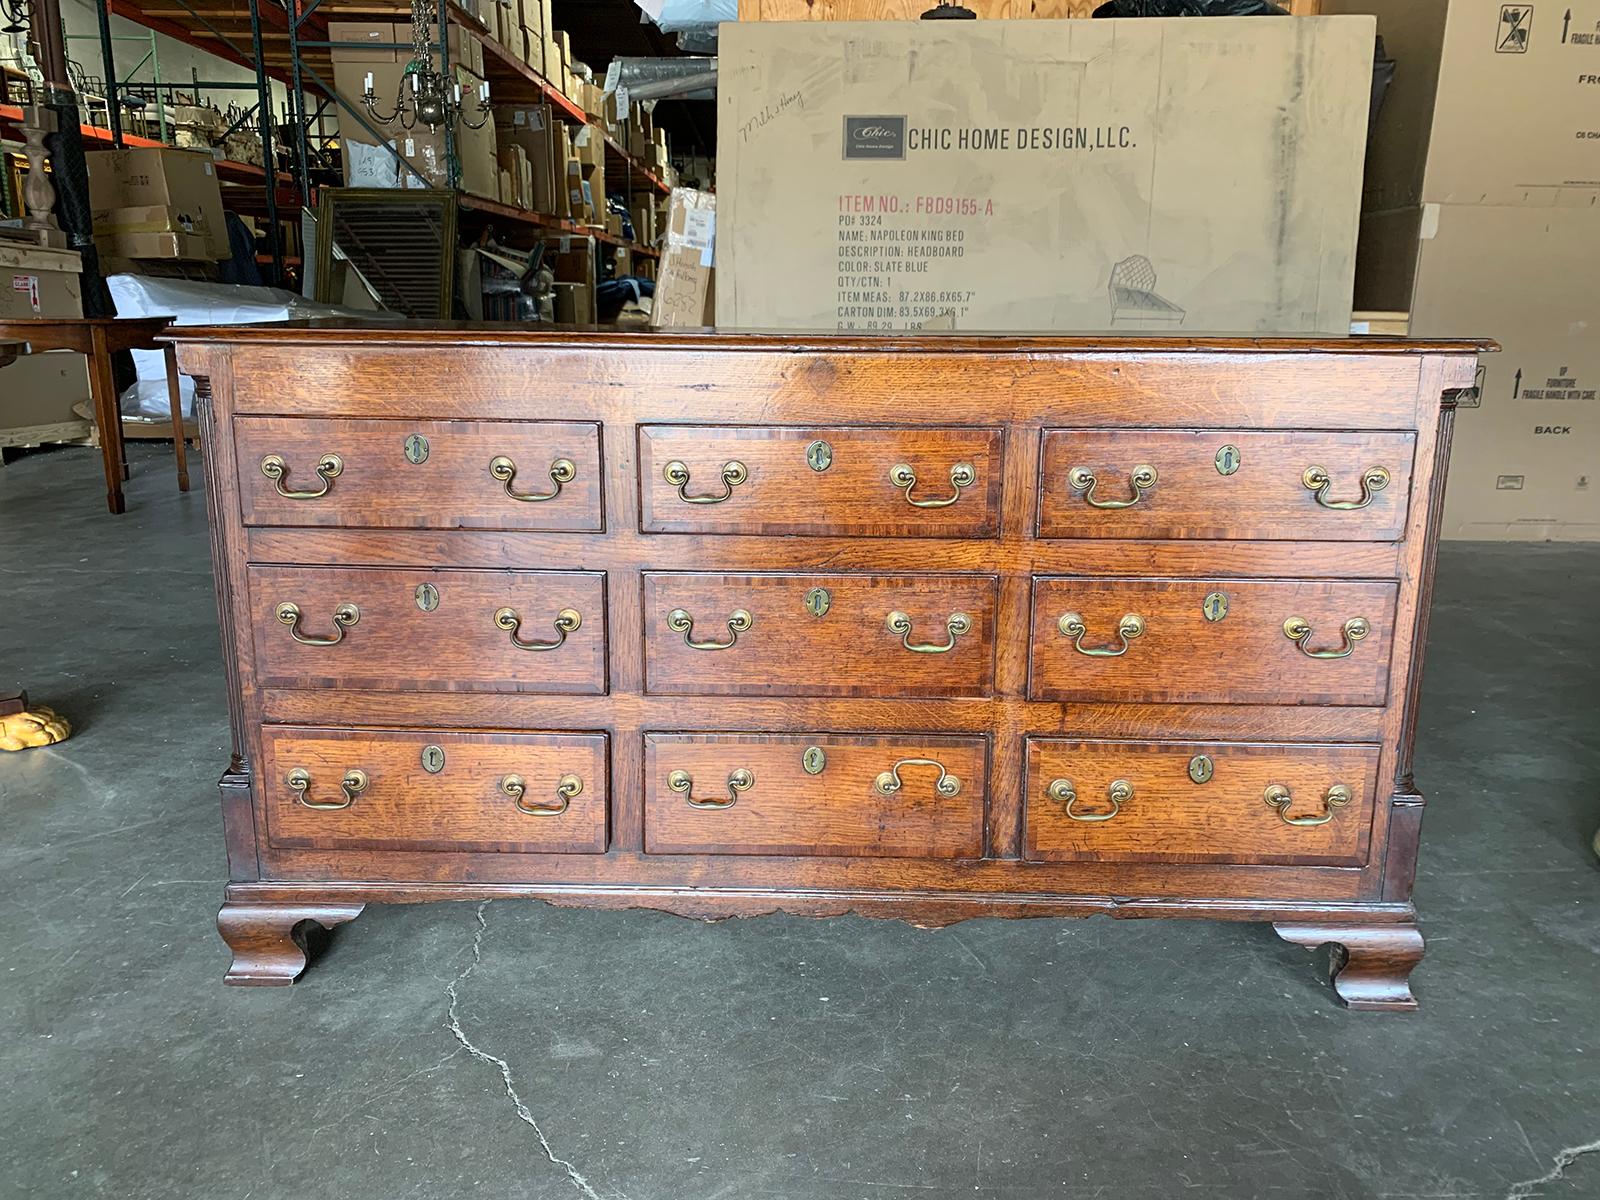 18th-19th century Welsh oak dresser base with unique drawers.